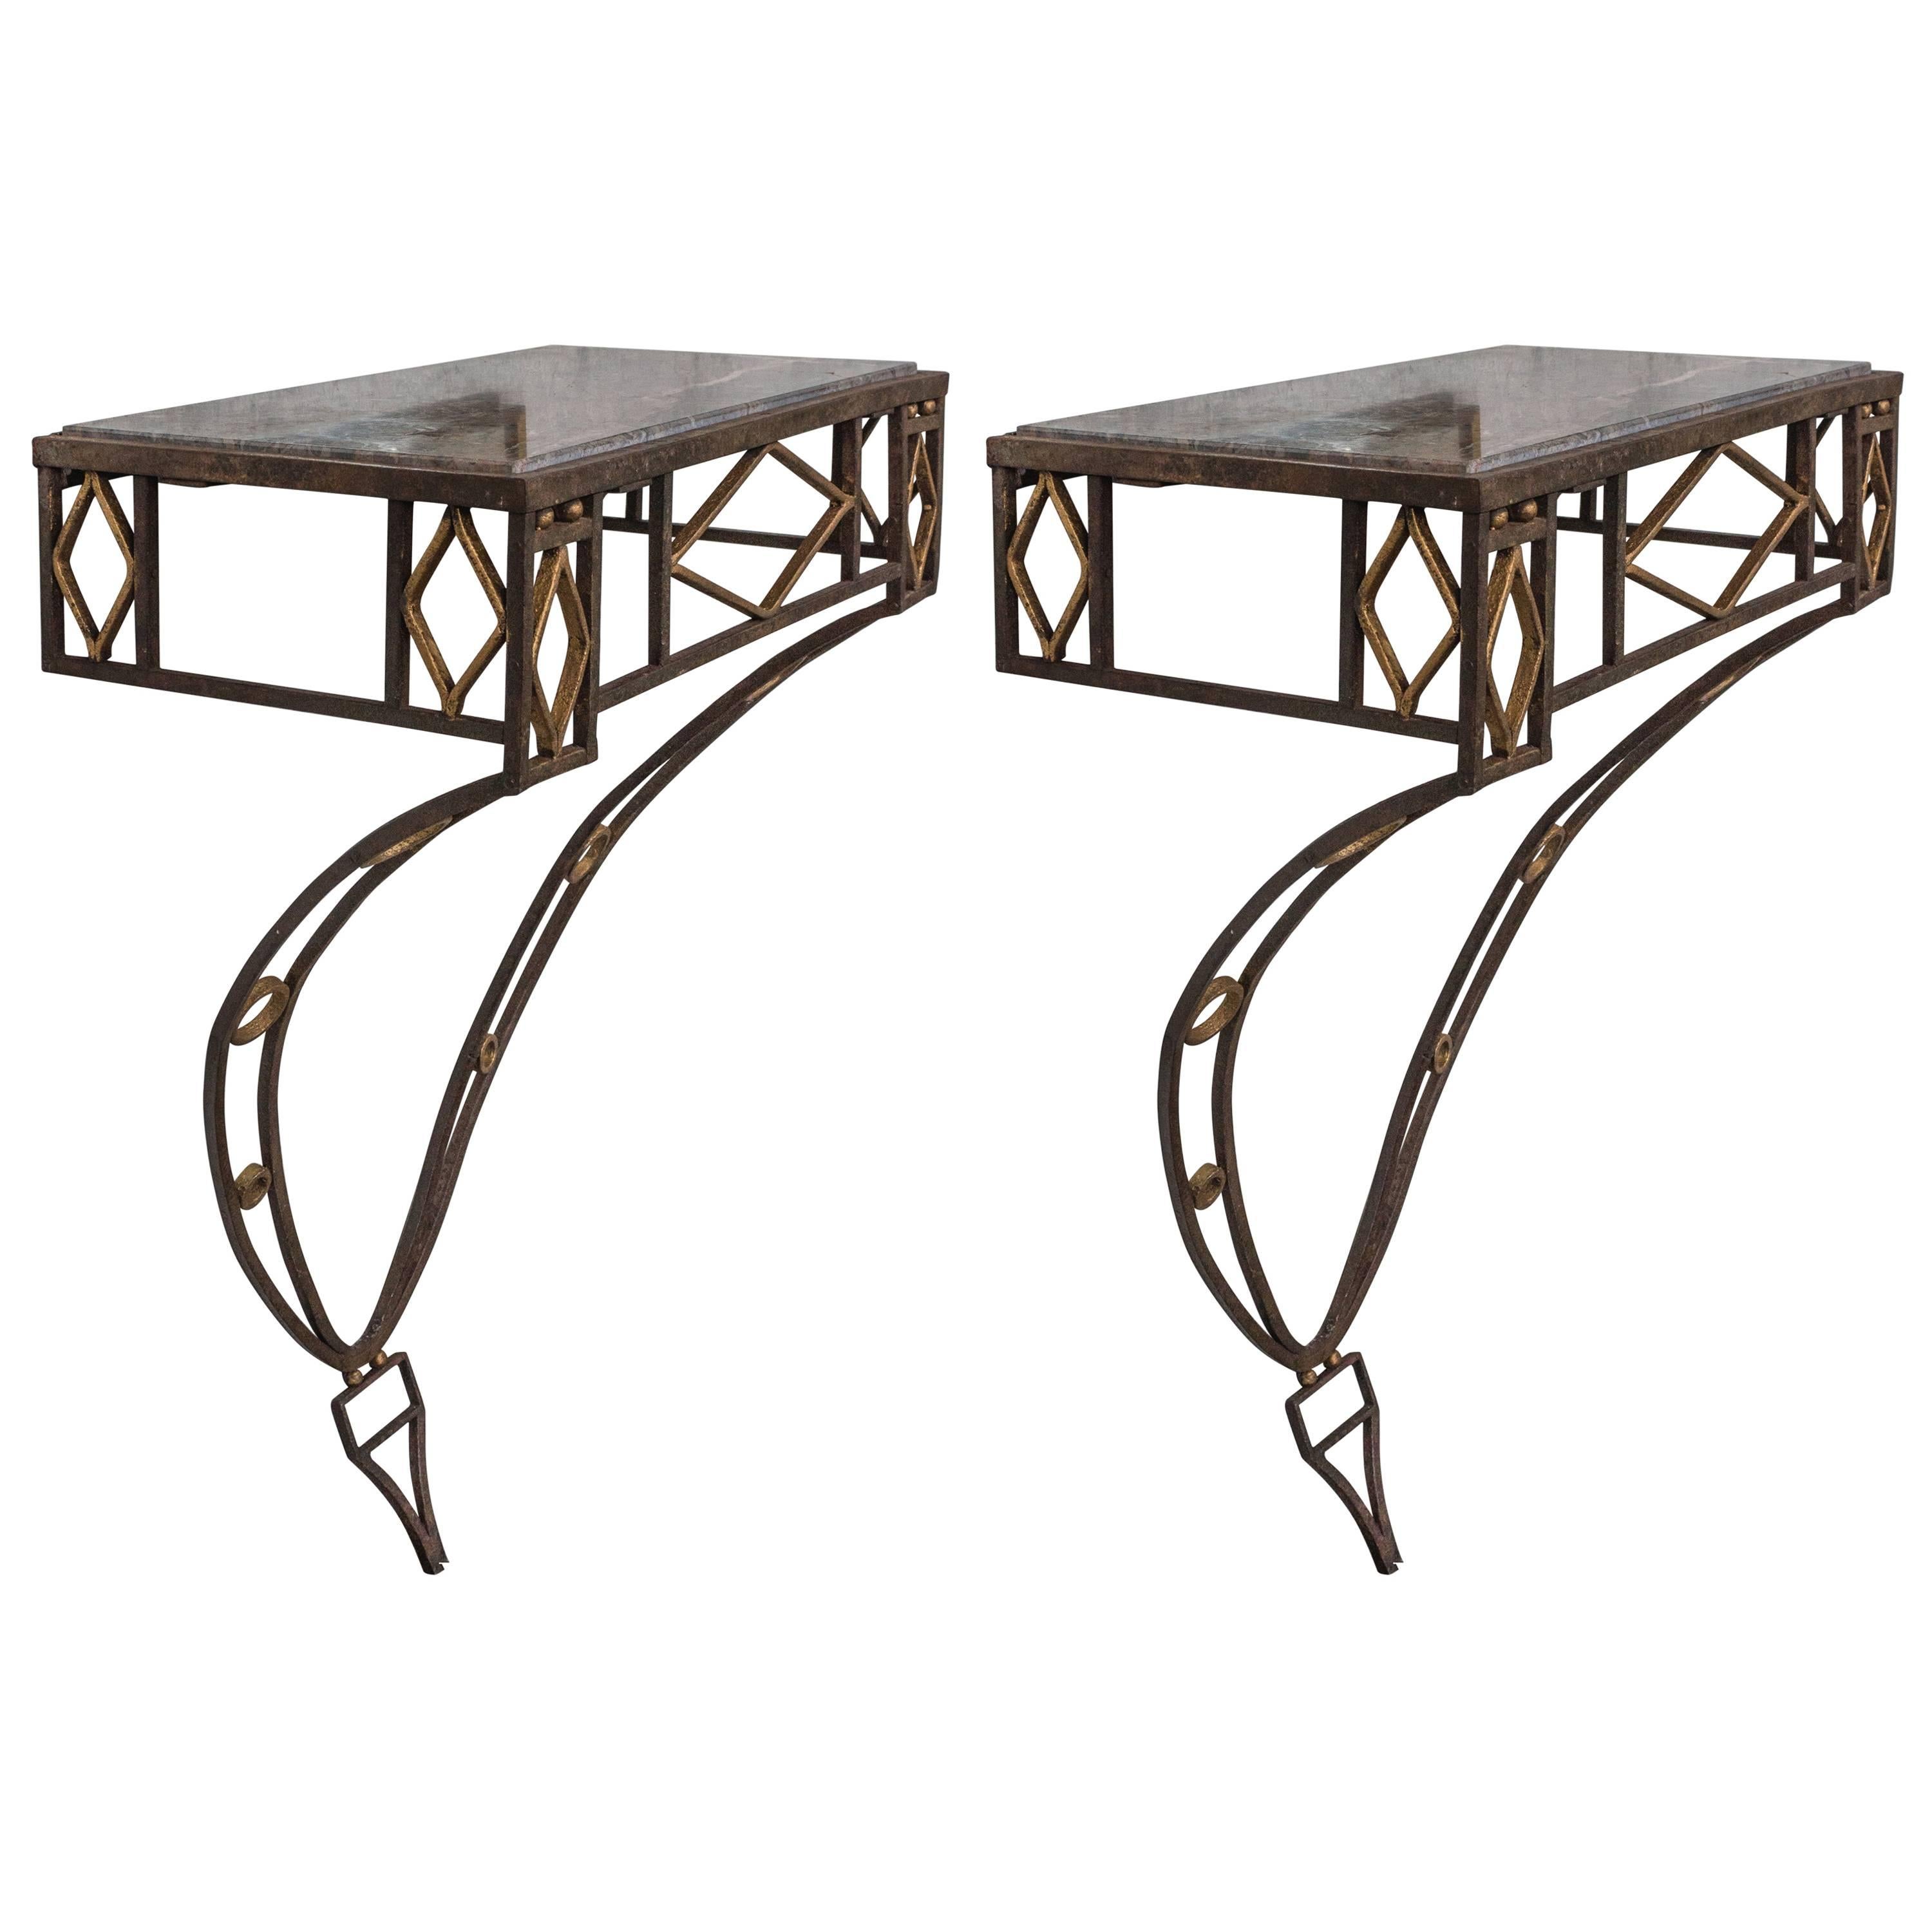 Pair of Art Deco Style Iron Wall-Mounted Consoles